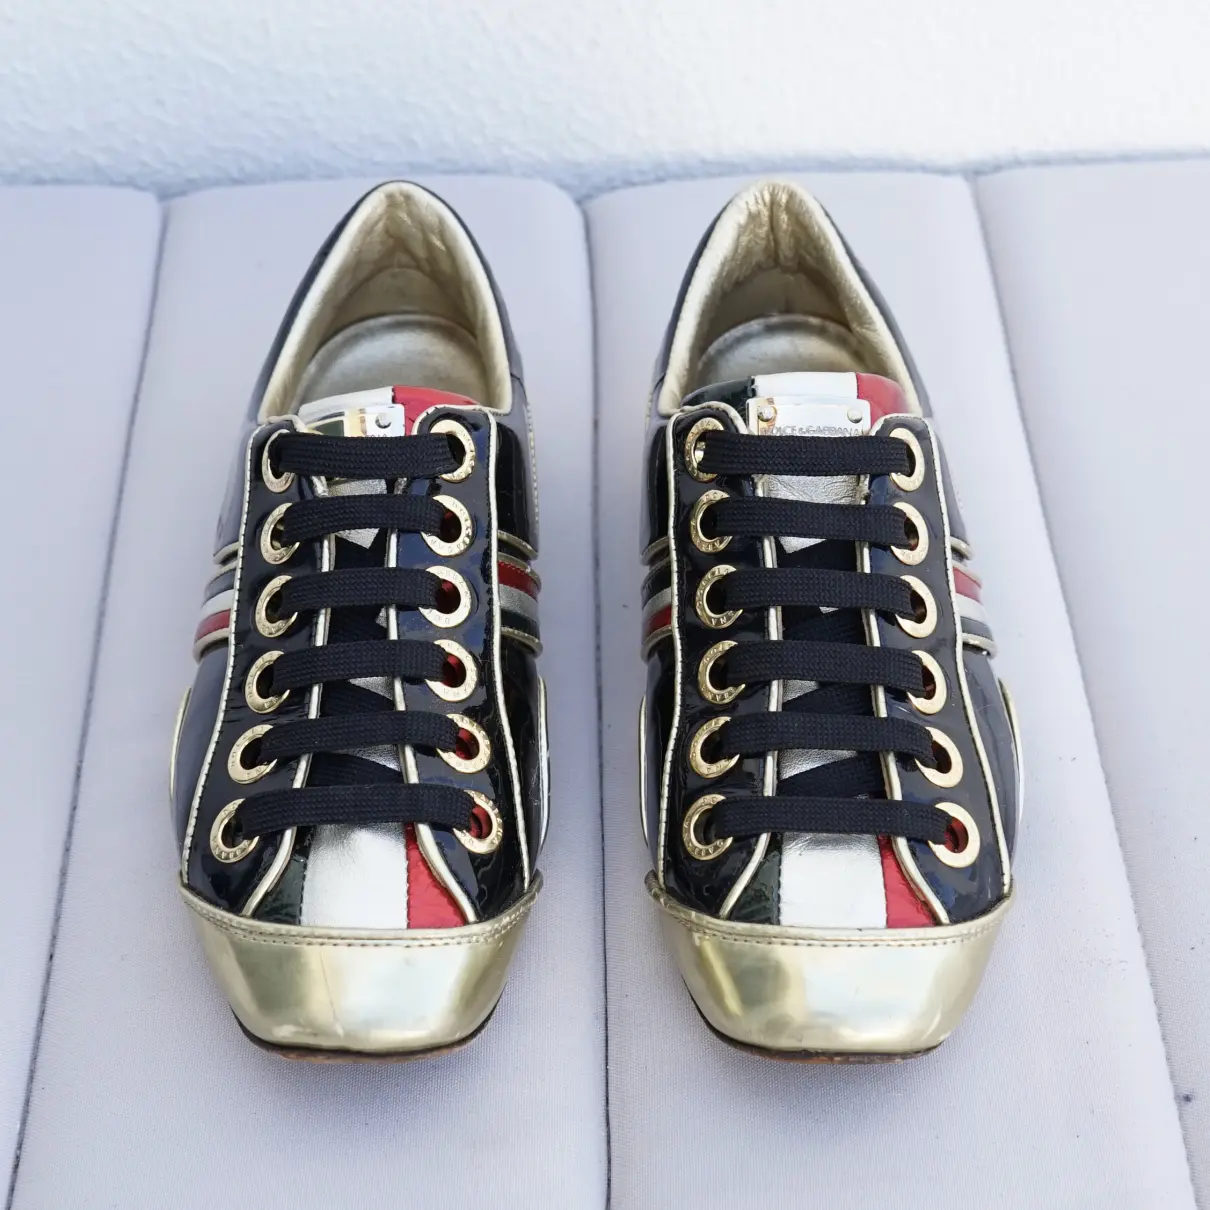 Buy Dolce & Gabbana Patent leather trainers online